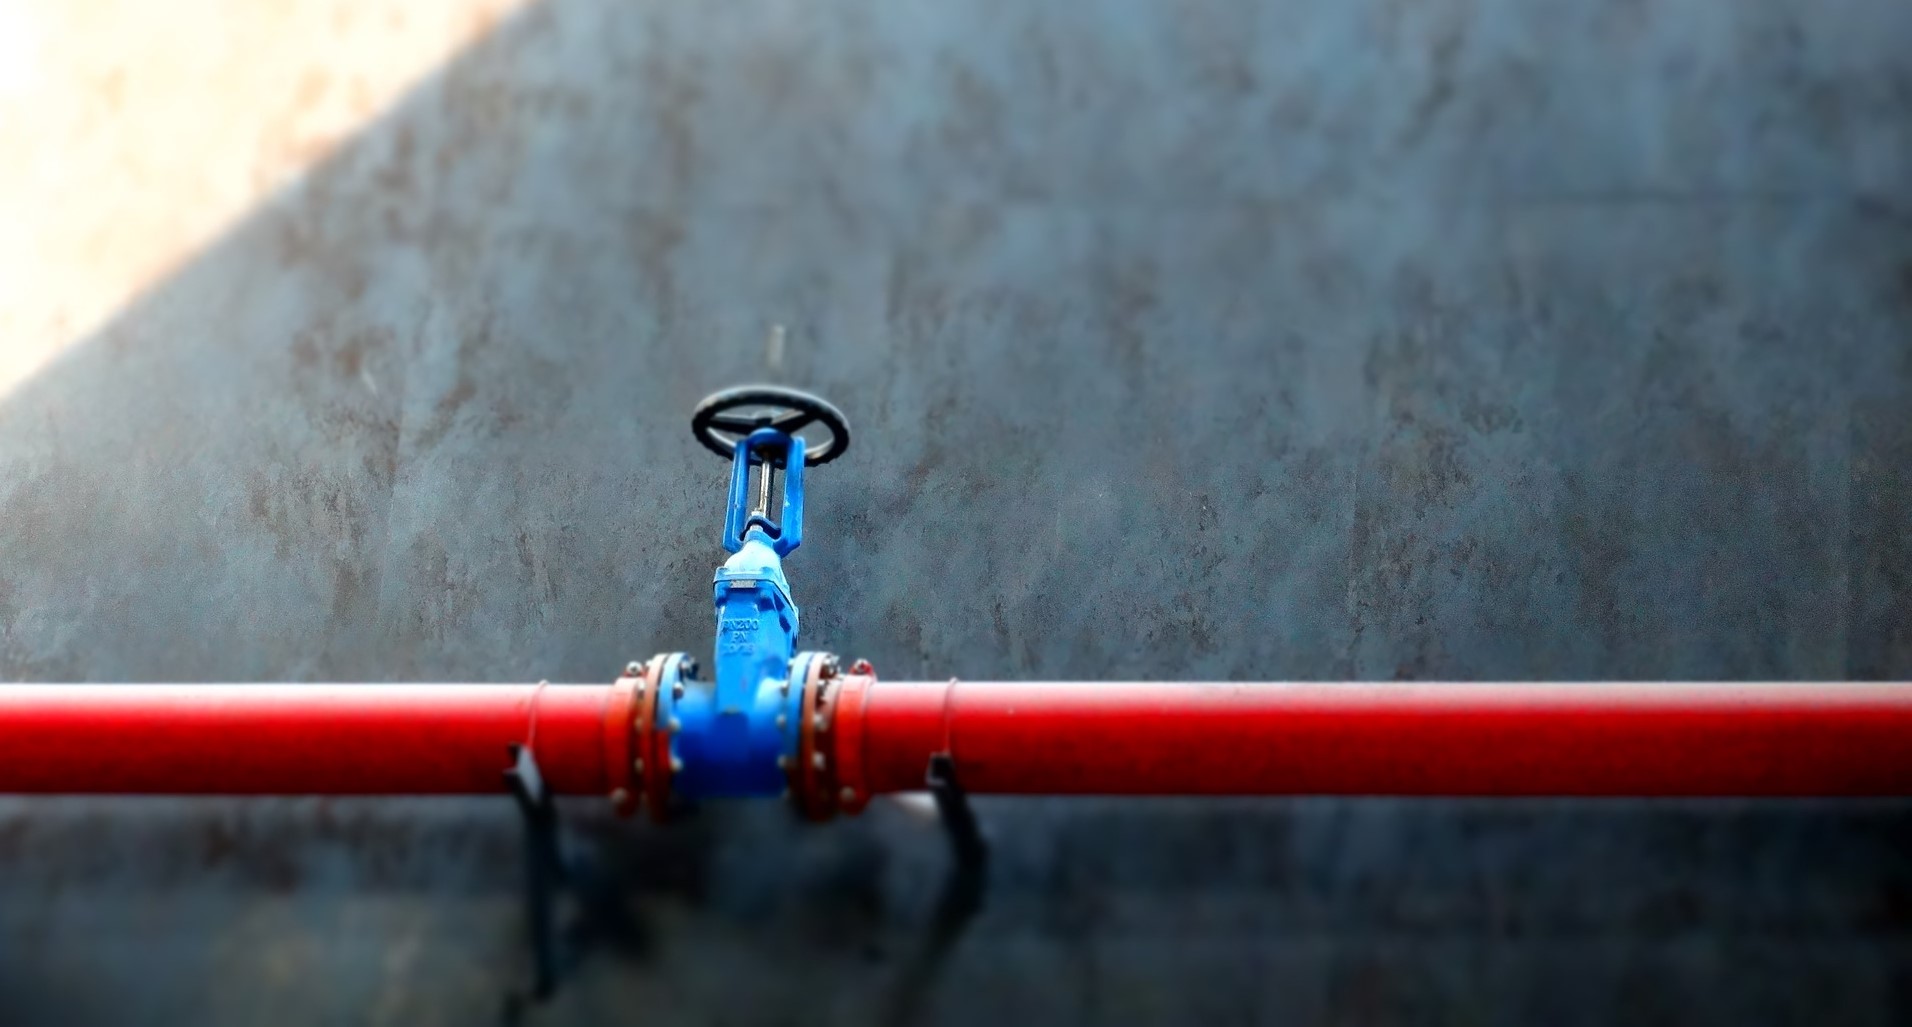 Representational image of a water pipeline. Photo credit: Pixabay